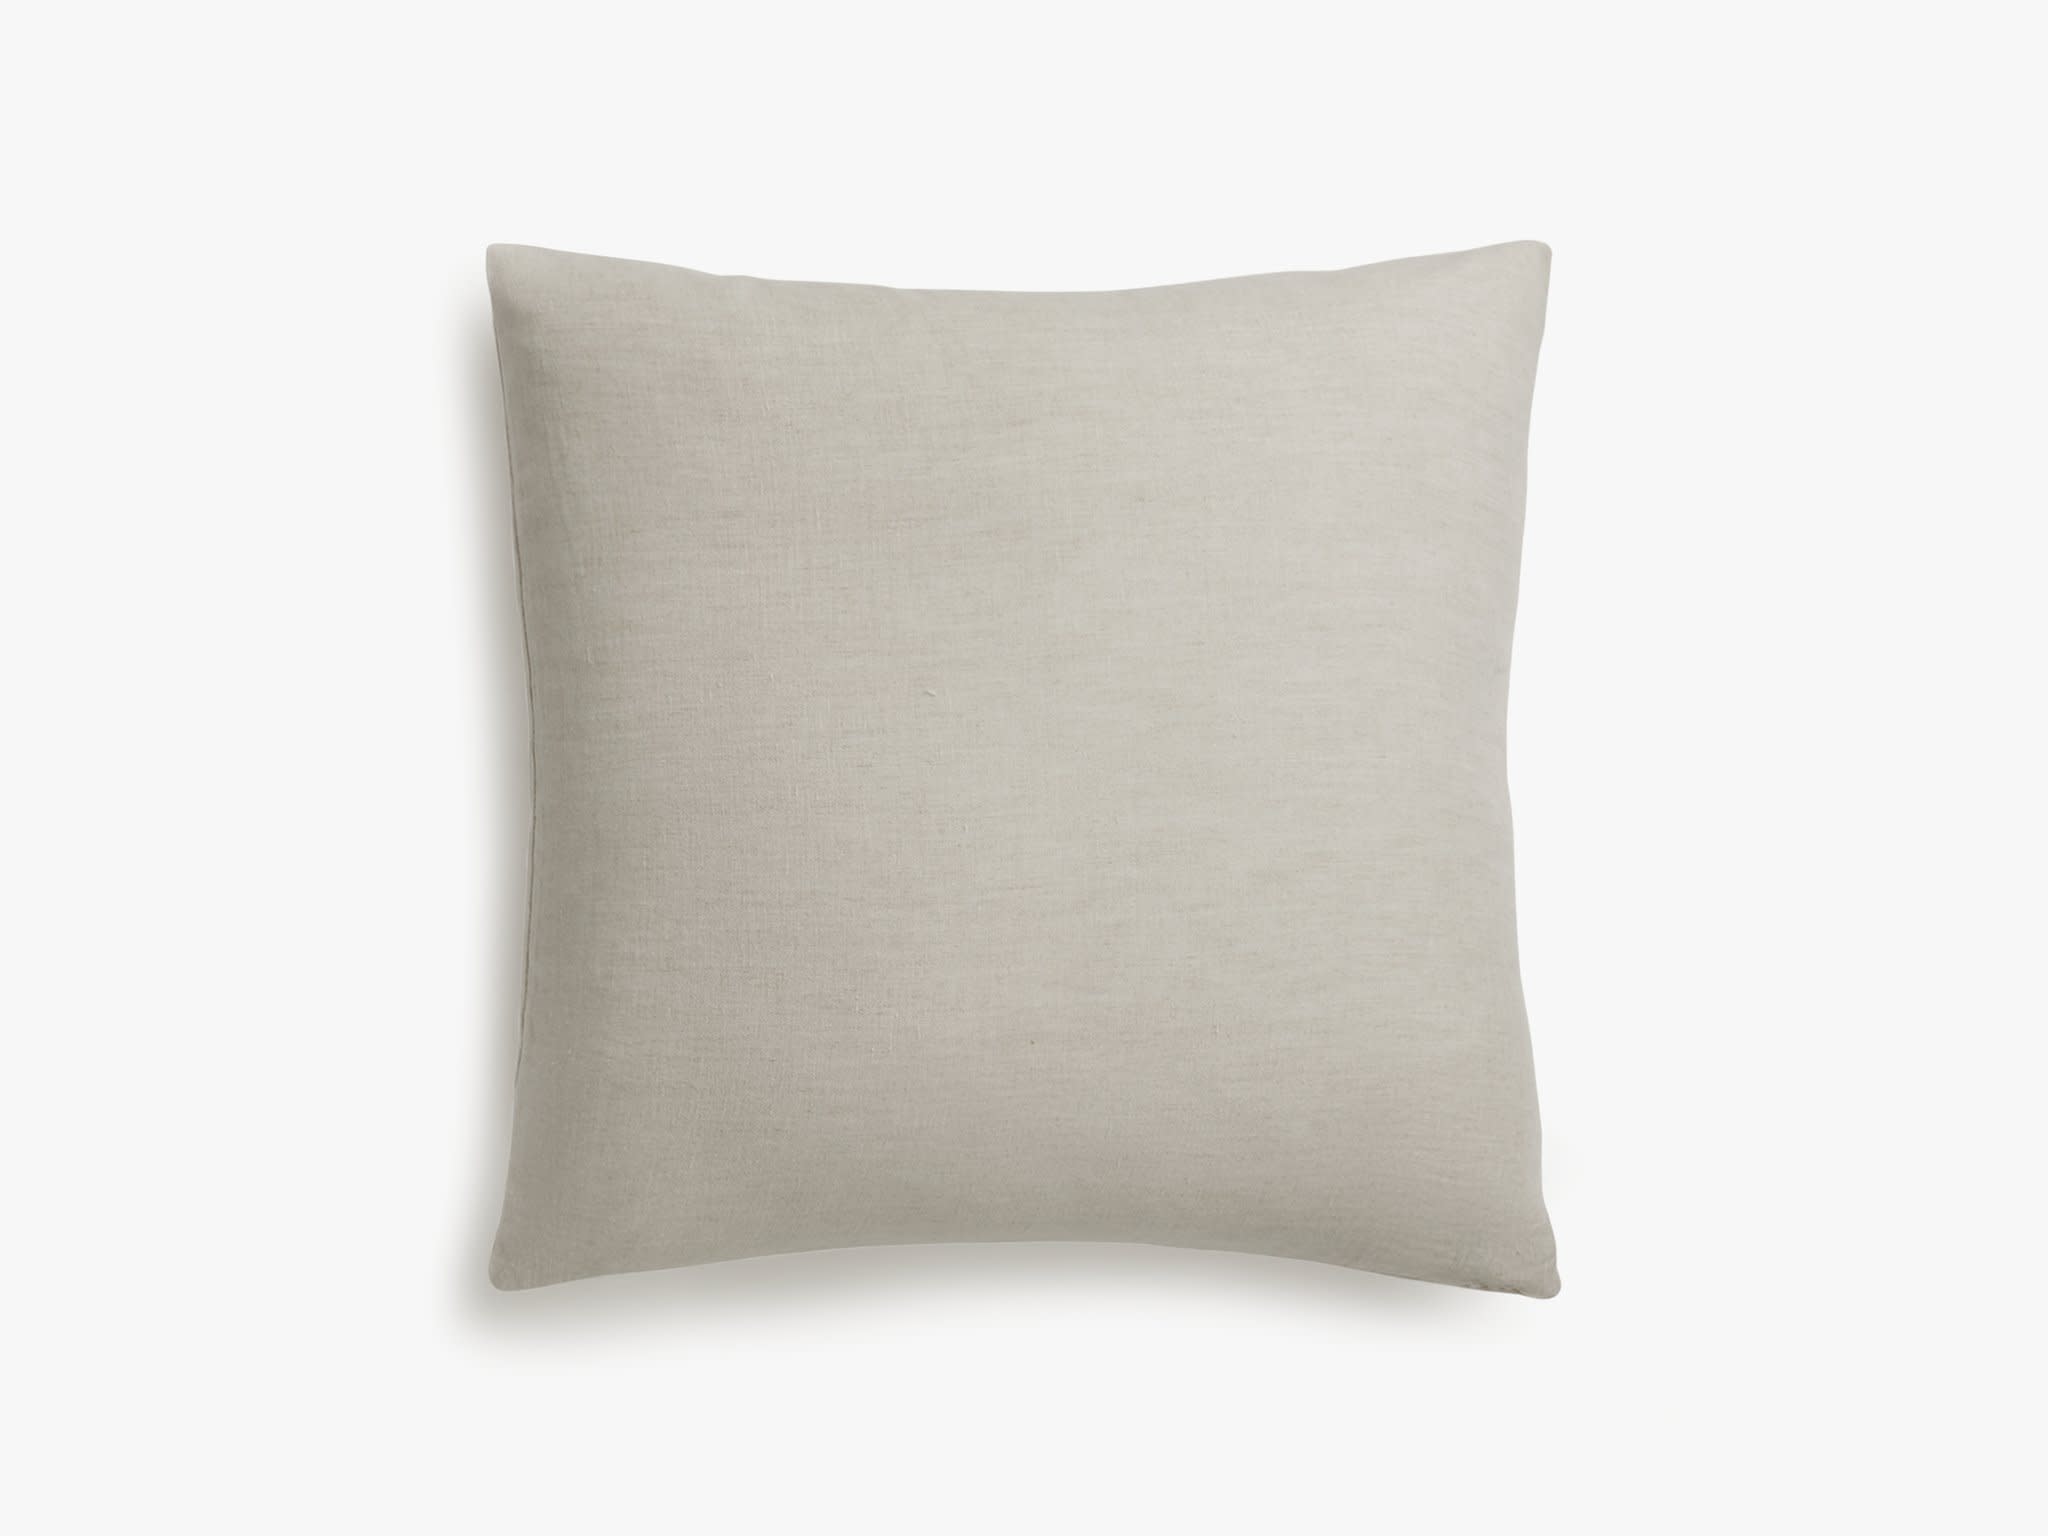 Natural Chambray Linen Pillow Cover Product Image